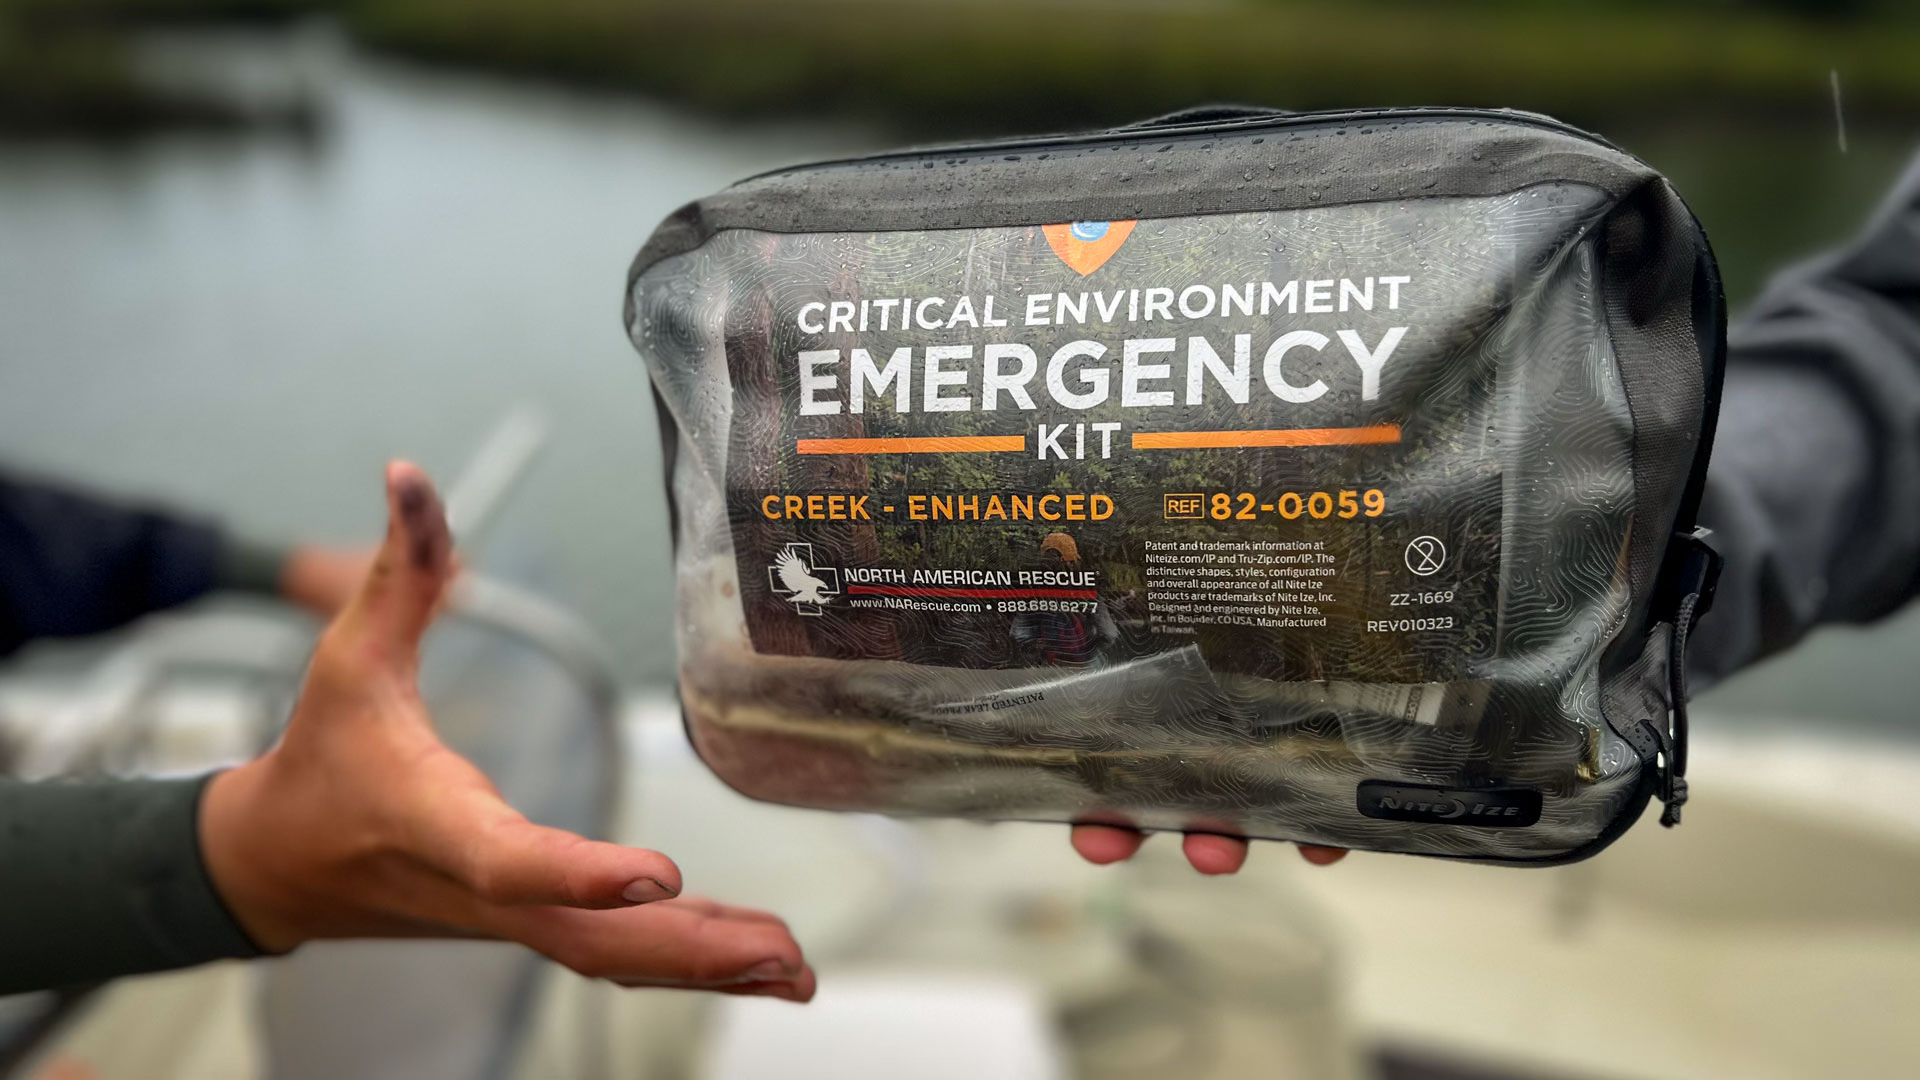 Critical Environment Emergency Kit Being Handed To Person On Boat